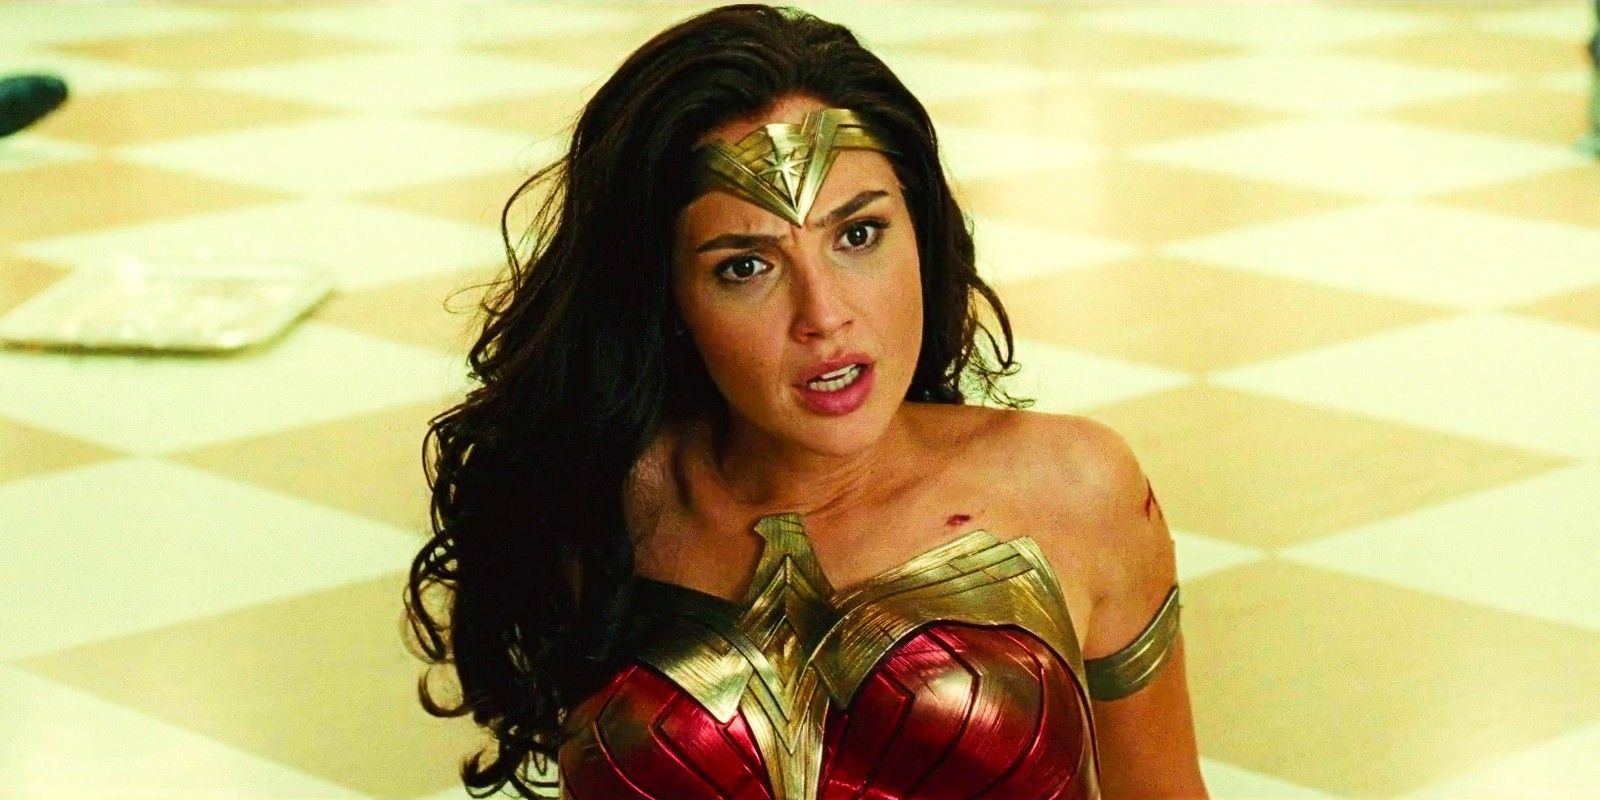 popular-dcu-wonder-woman-fancast-opens-up-about-her-superhero-movie-future:-"it’s-just-not-in-the-cards"